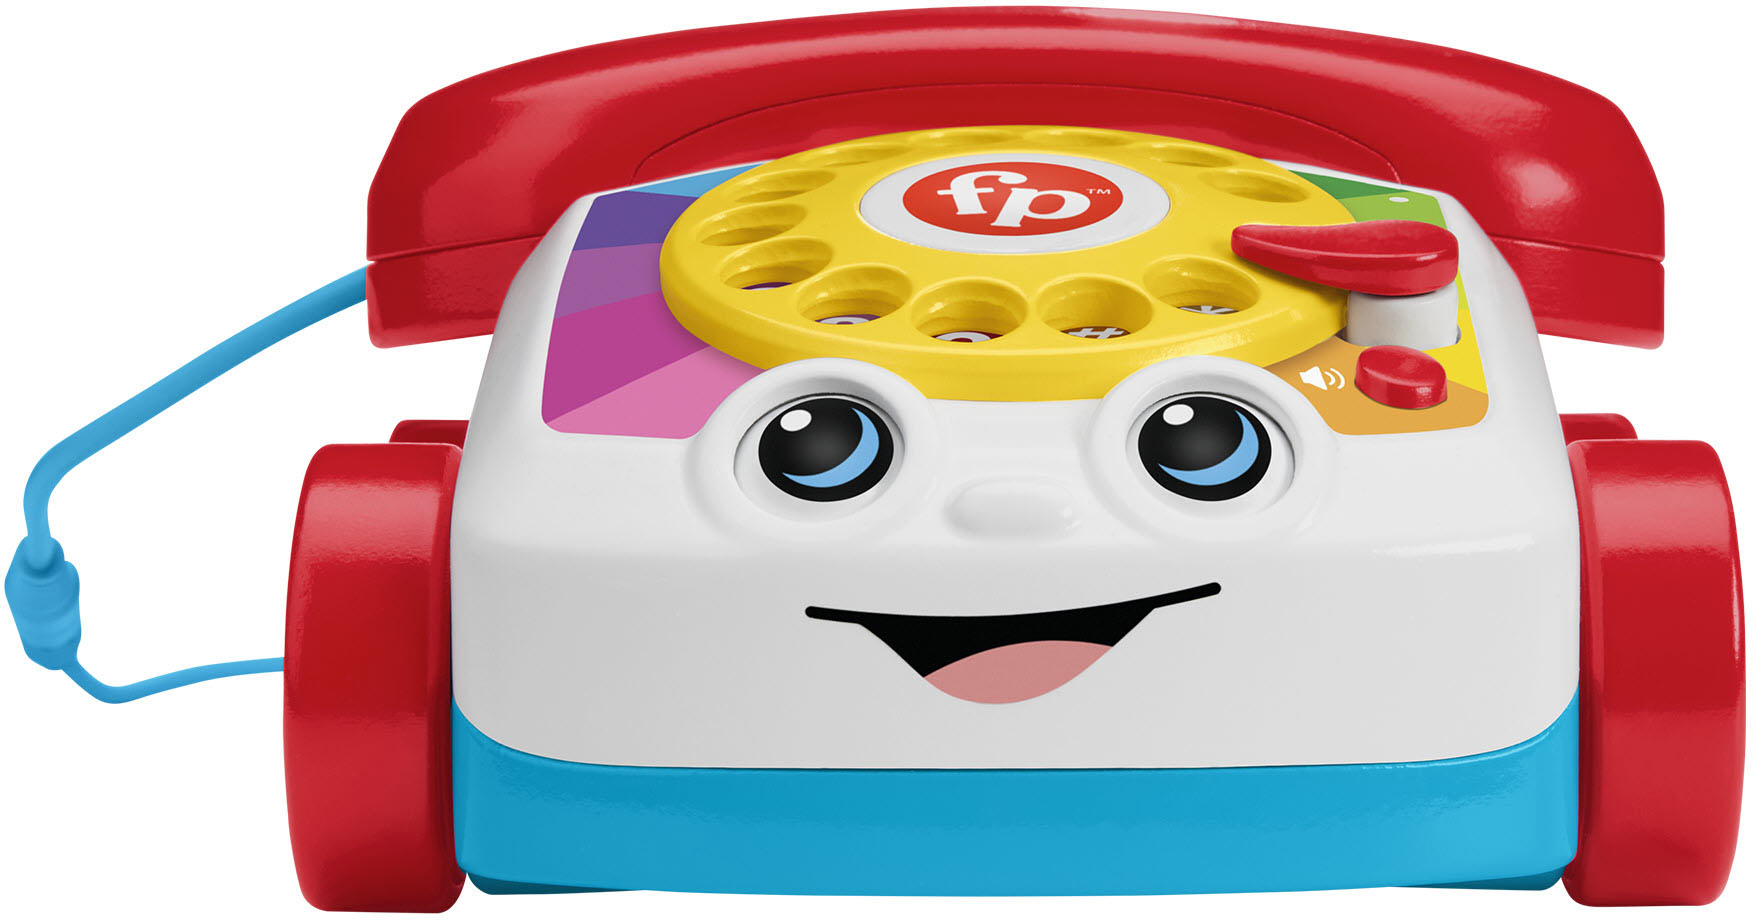 Fisher-Price Chatter Phone  Fisher price toys, Fisher price, Telephone